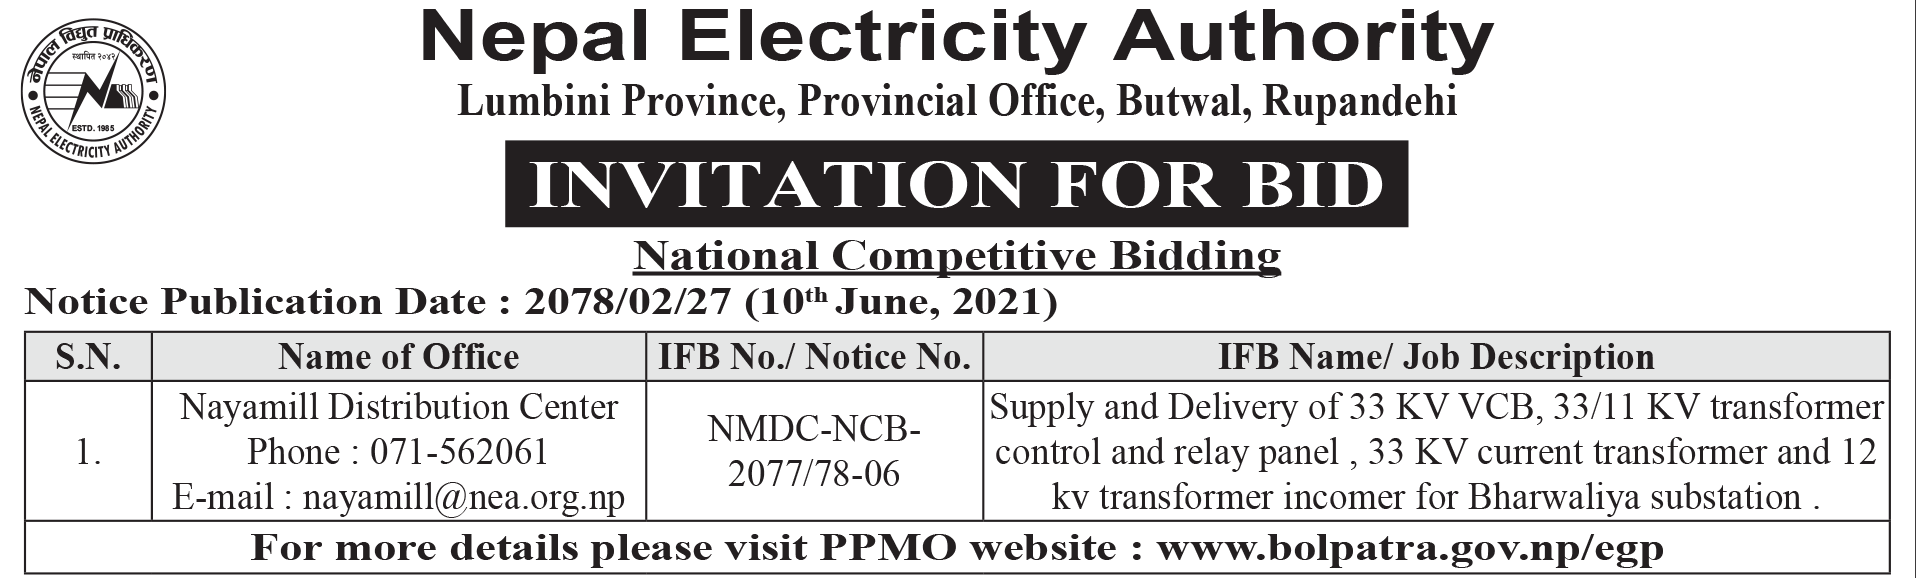 Nepal Electricity Authority, Lumbini Province, Provincial office, Butwal announces bid for supply and Delivery of Transformer control and relay panel. Image 12(1).png